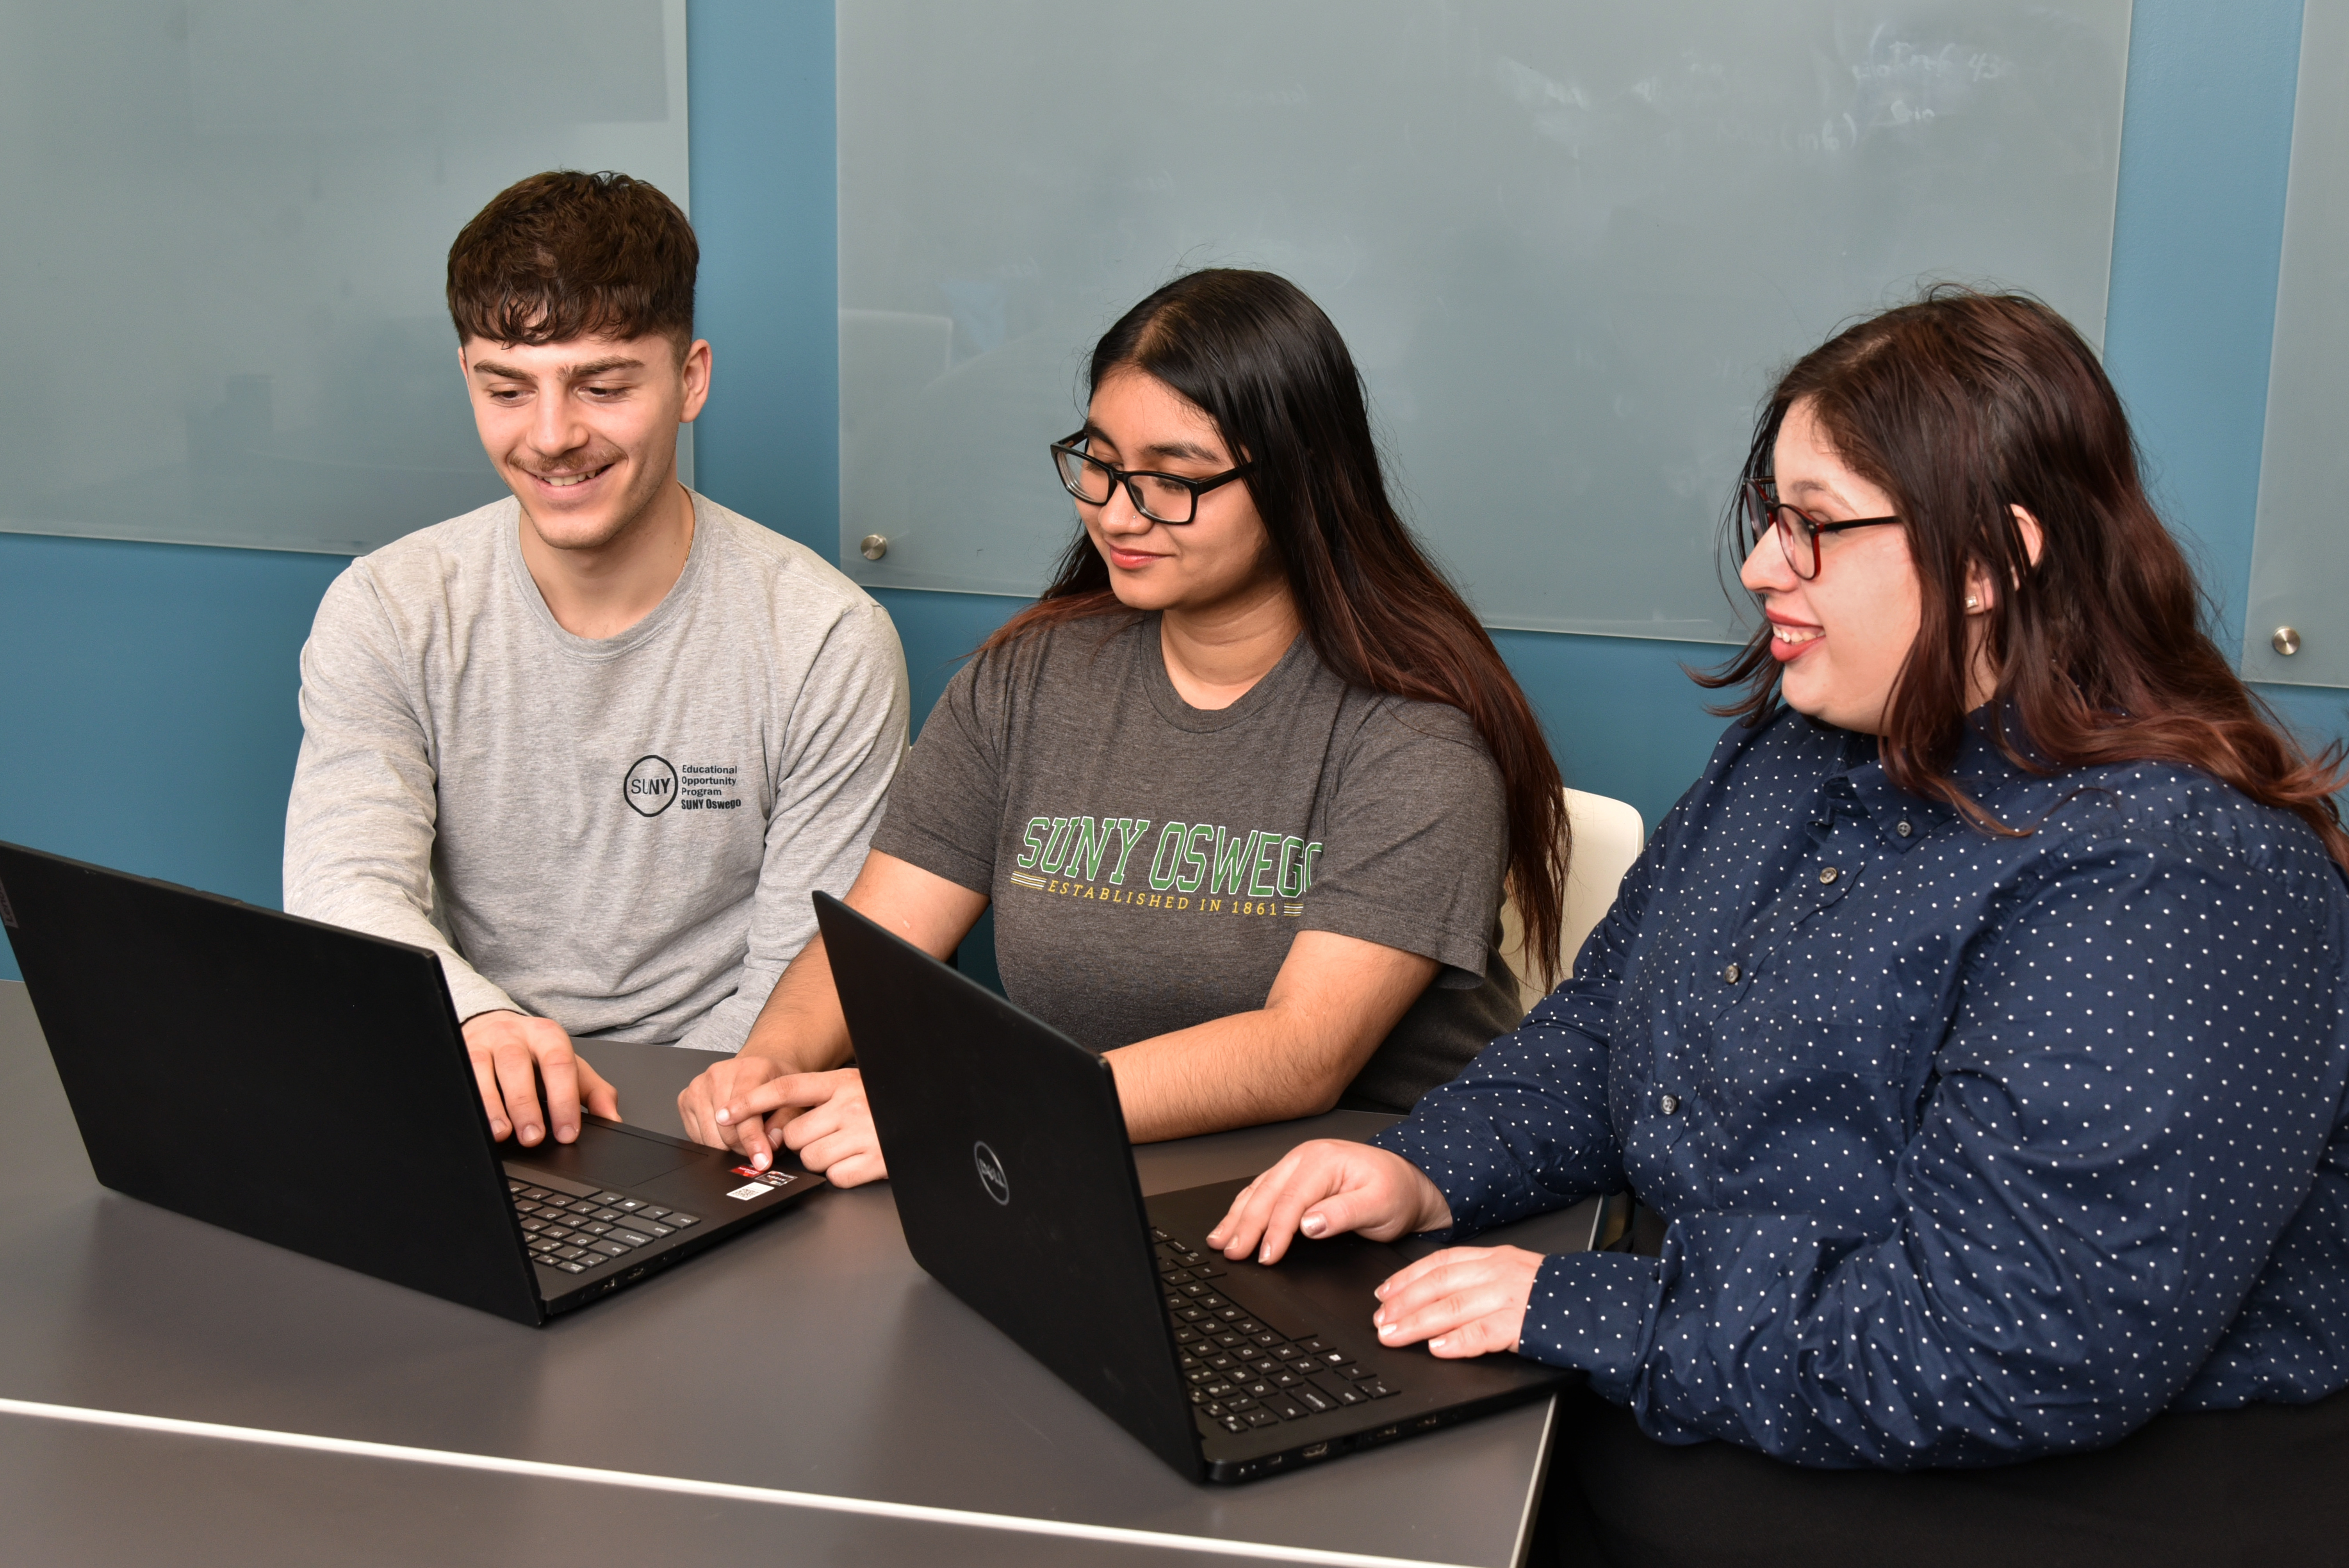 SUNY Oswego students, from left, Paul Lomanto, Norun Tabassum and Angela Aldatz, will help meet an initiative to increase FAFSA (Financial Aid Free Student Application) completion rates, thanks to support from SUNY and AmeriCorps. 